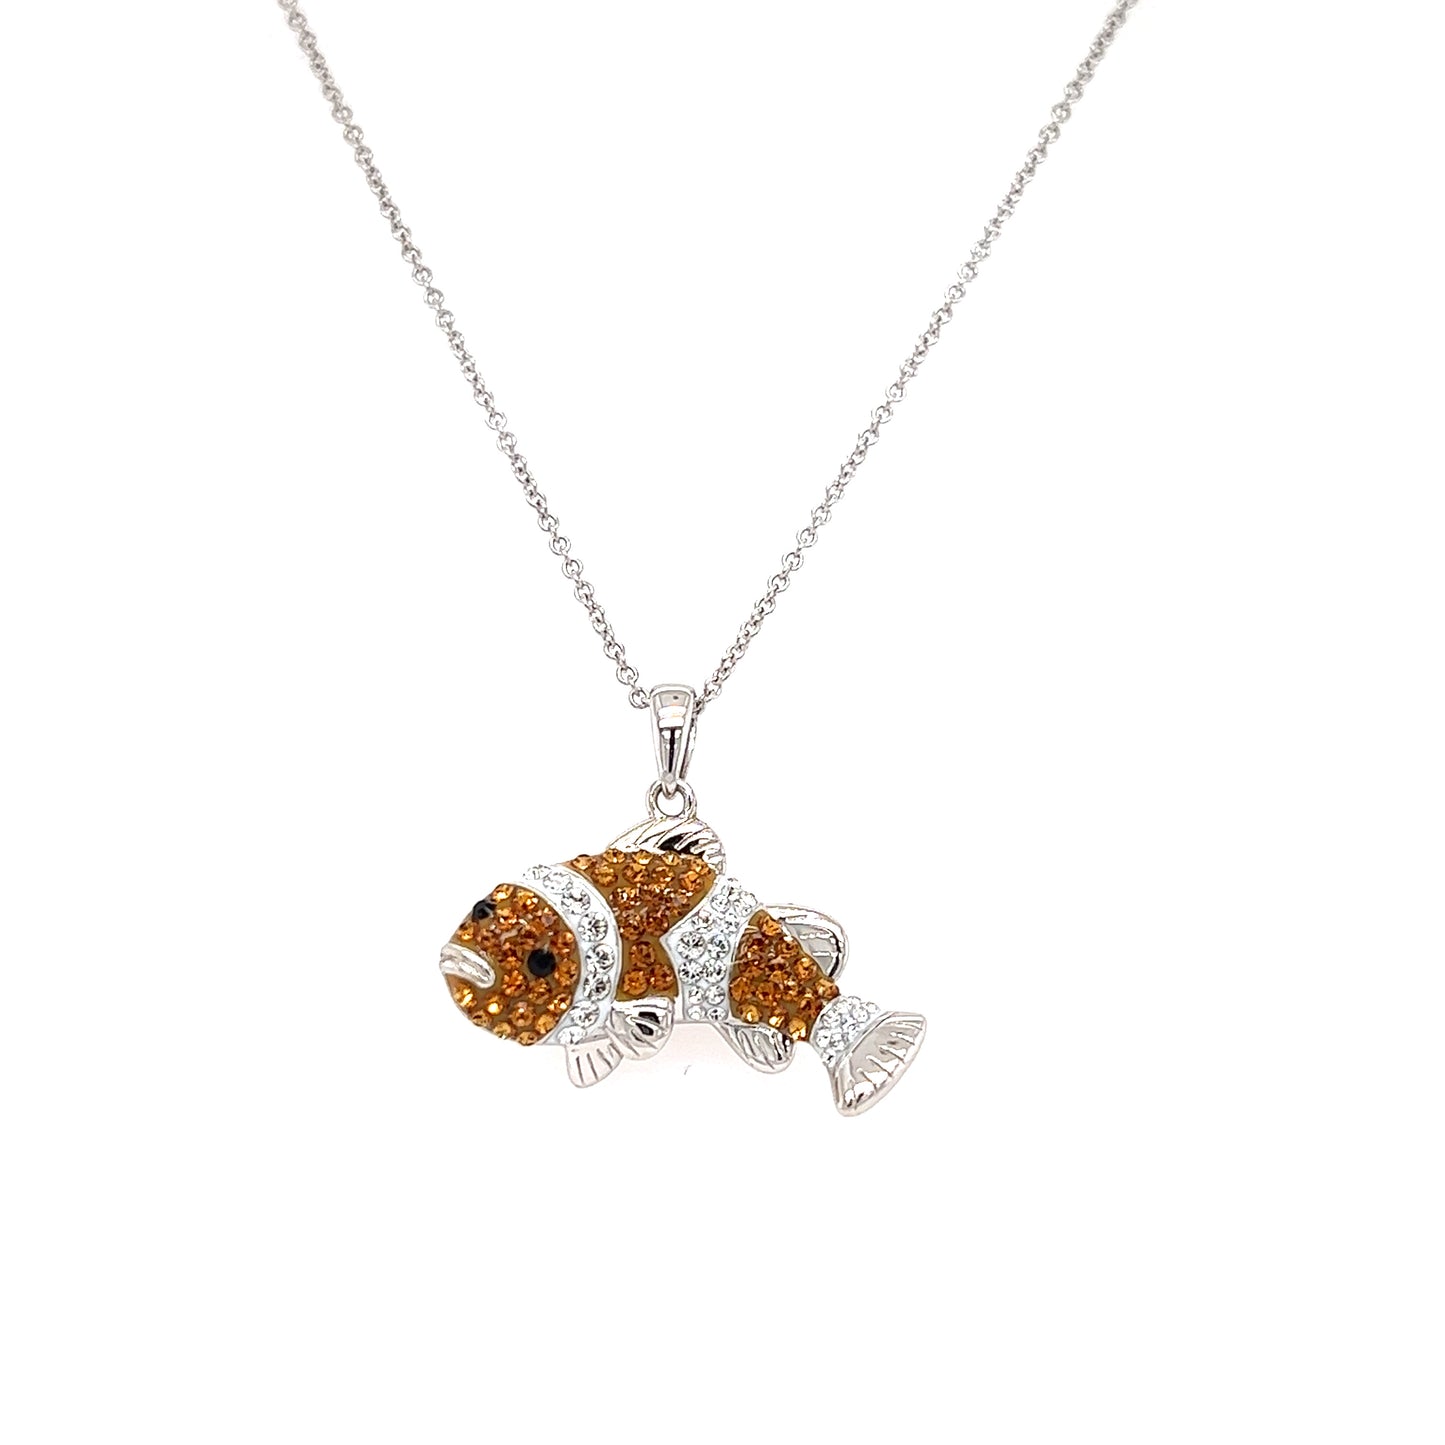 Clownfish Necklace with Orange and White Crystals in Sterling Silver Pendant and Chain Front View